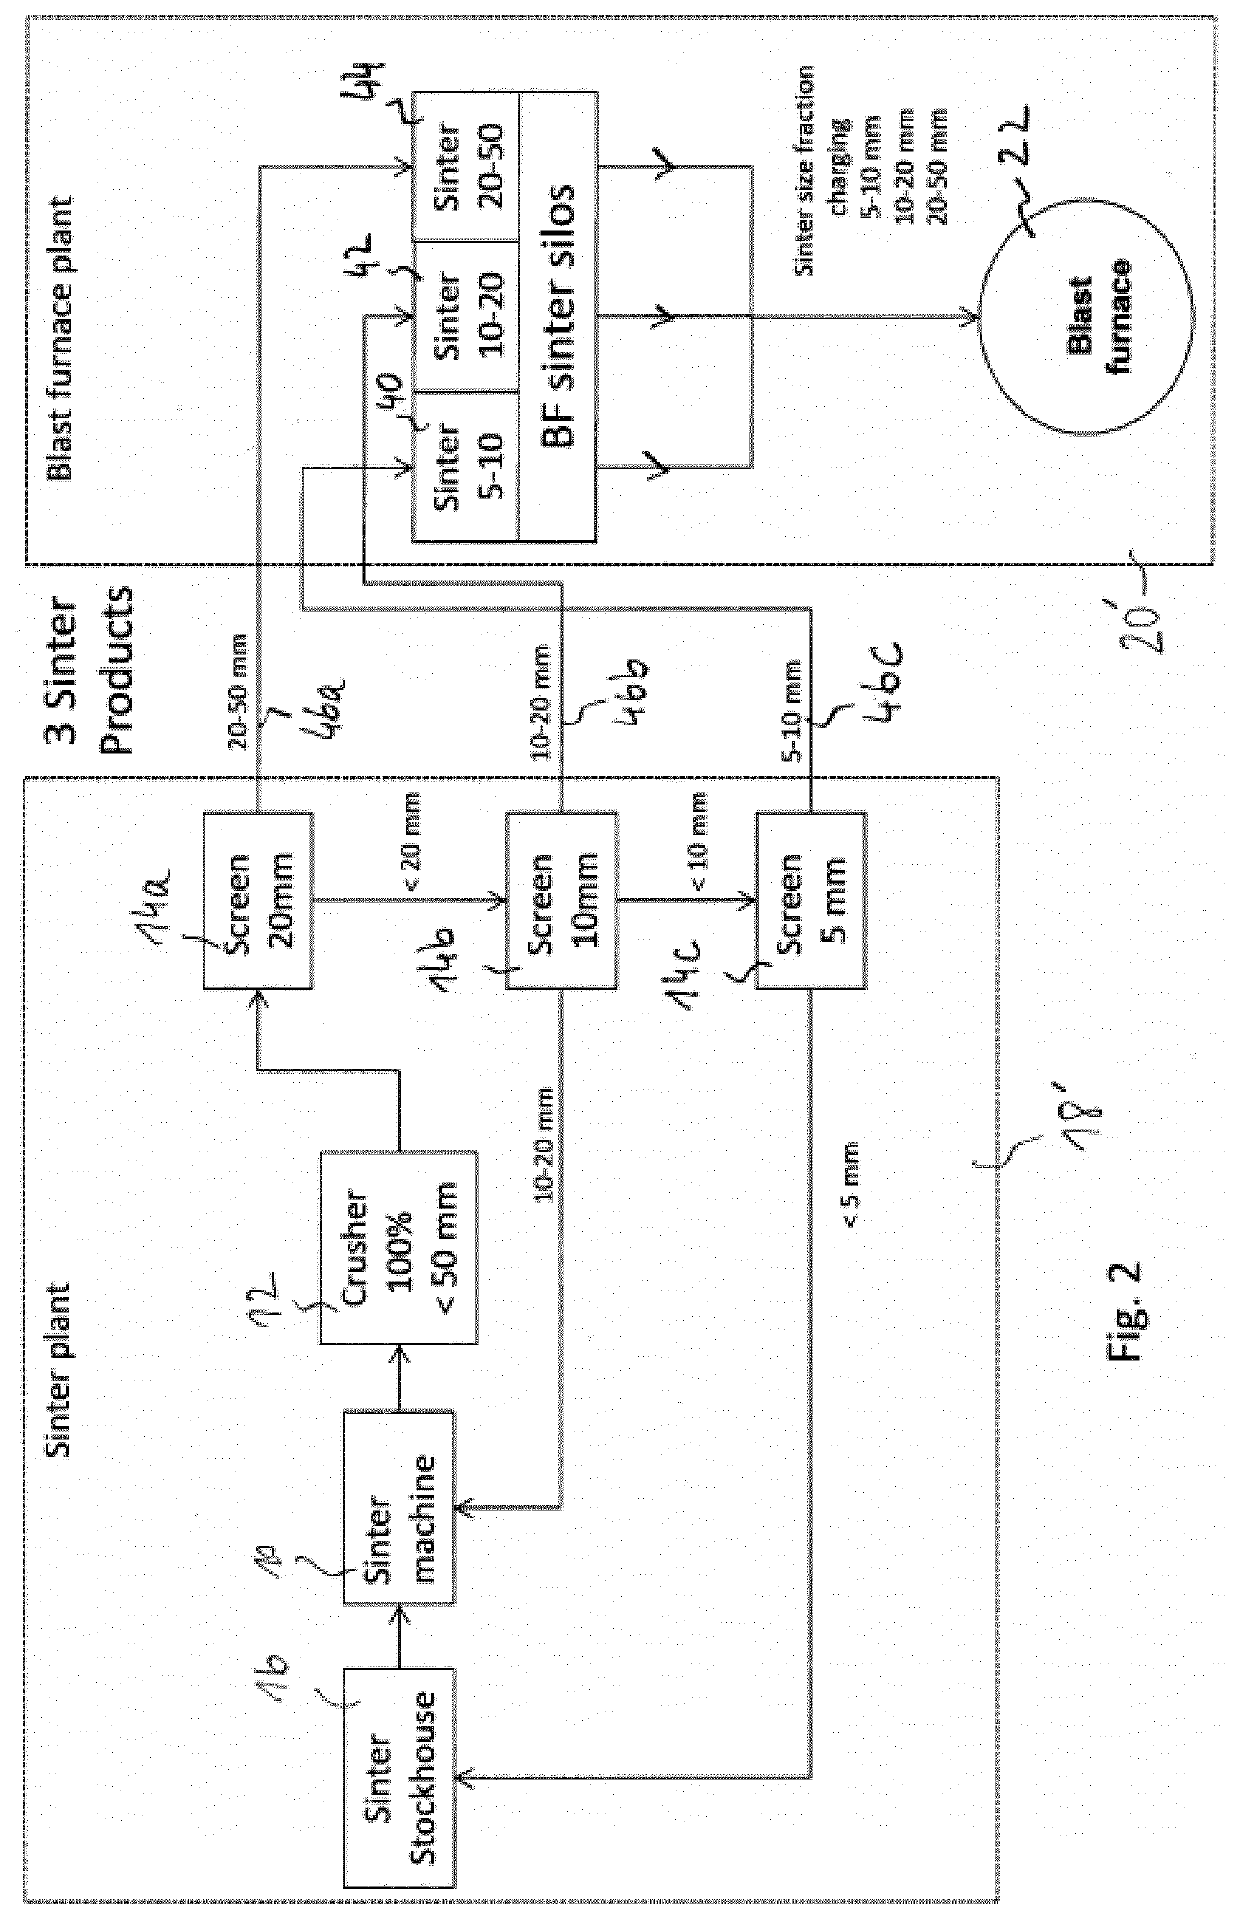 Method of operating a sinter plant